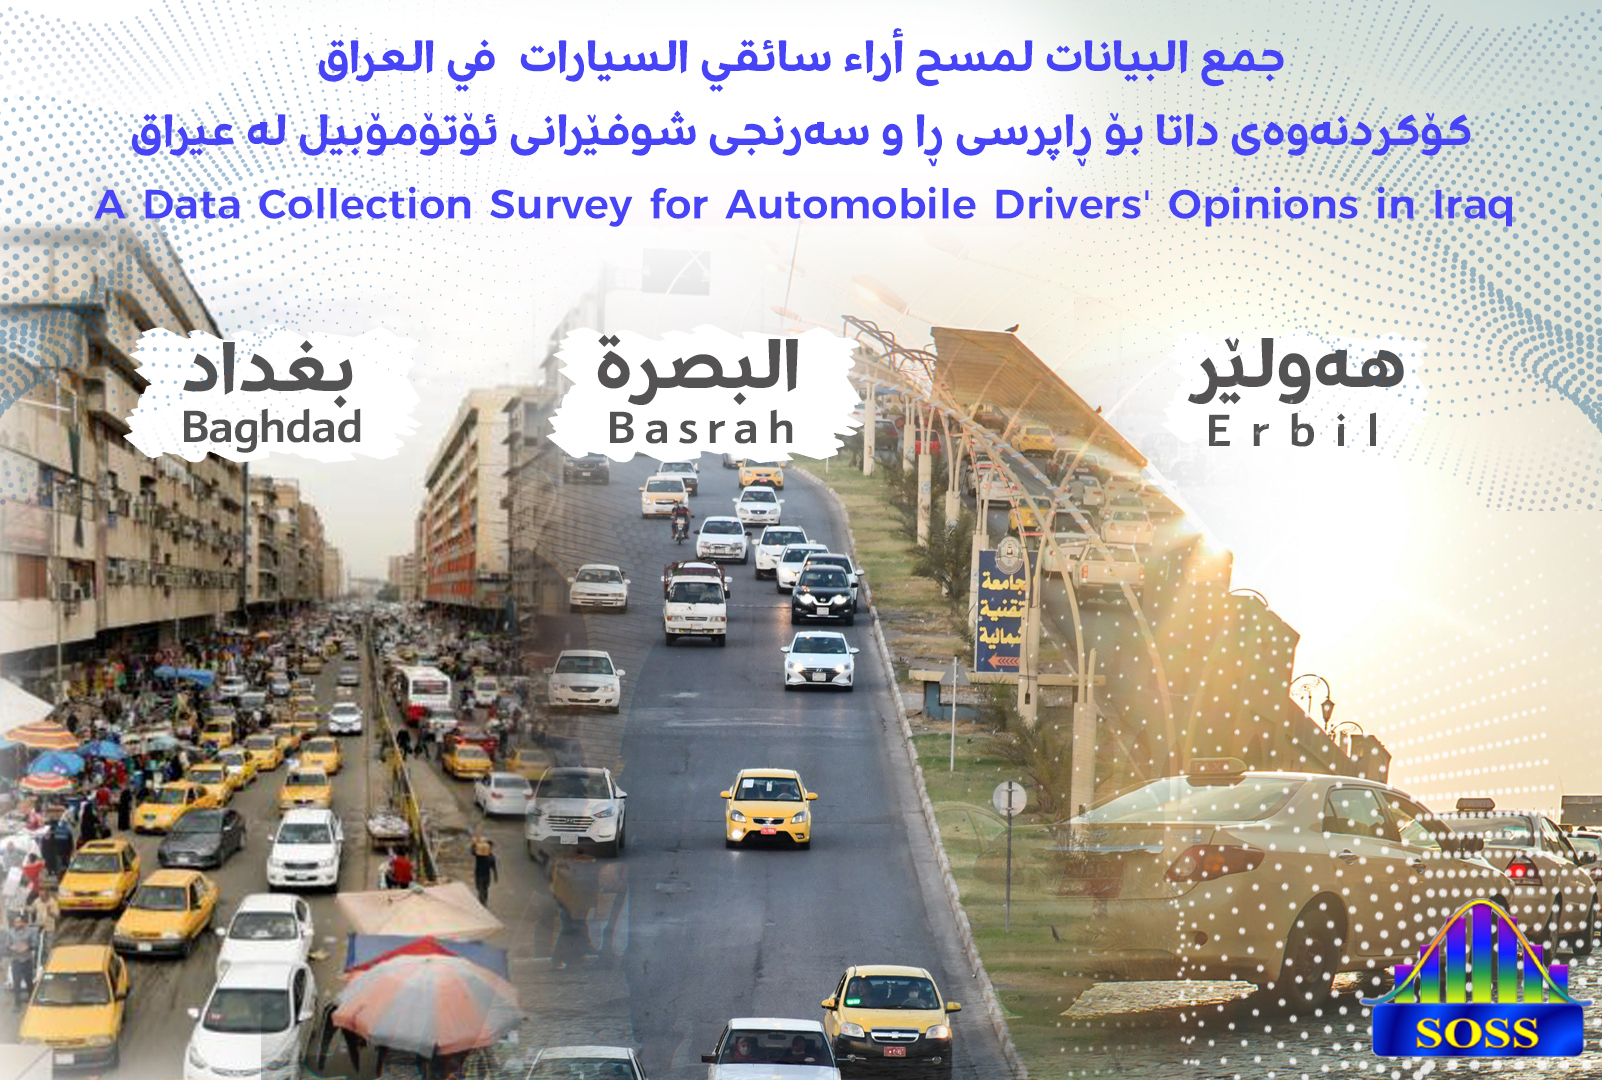 A Data Collection Survey for Automobile Drivers' Opinions in Iraq